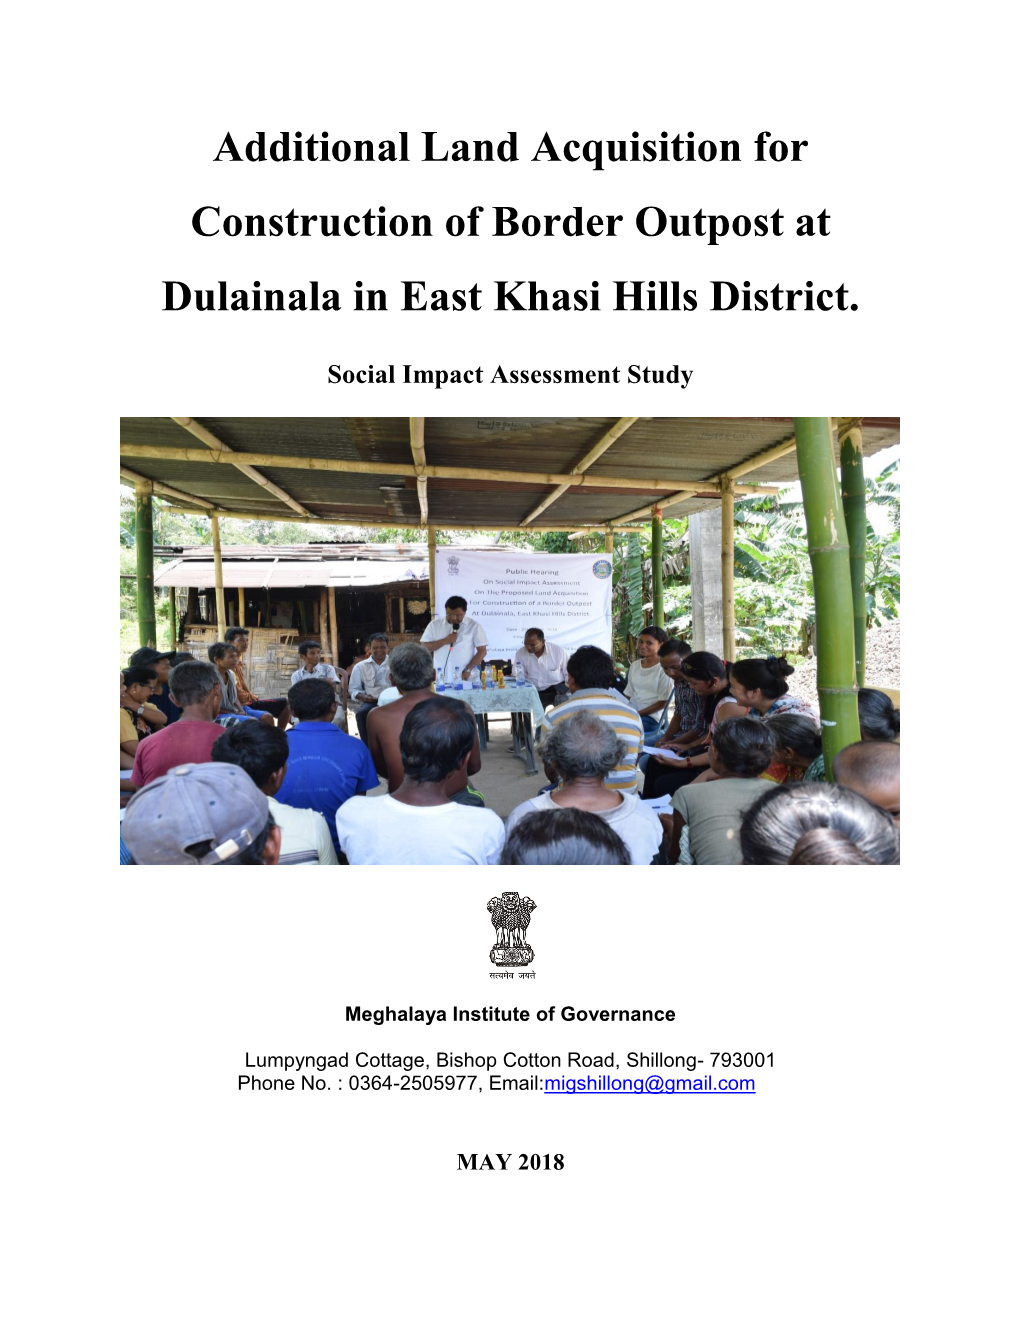 Additional Land Acquisition for Construction of Border Outpost at Dulainala in East Khasi Hills District